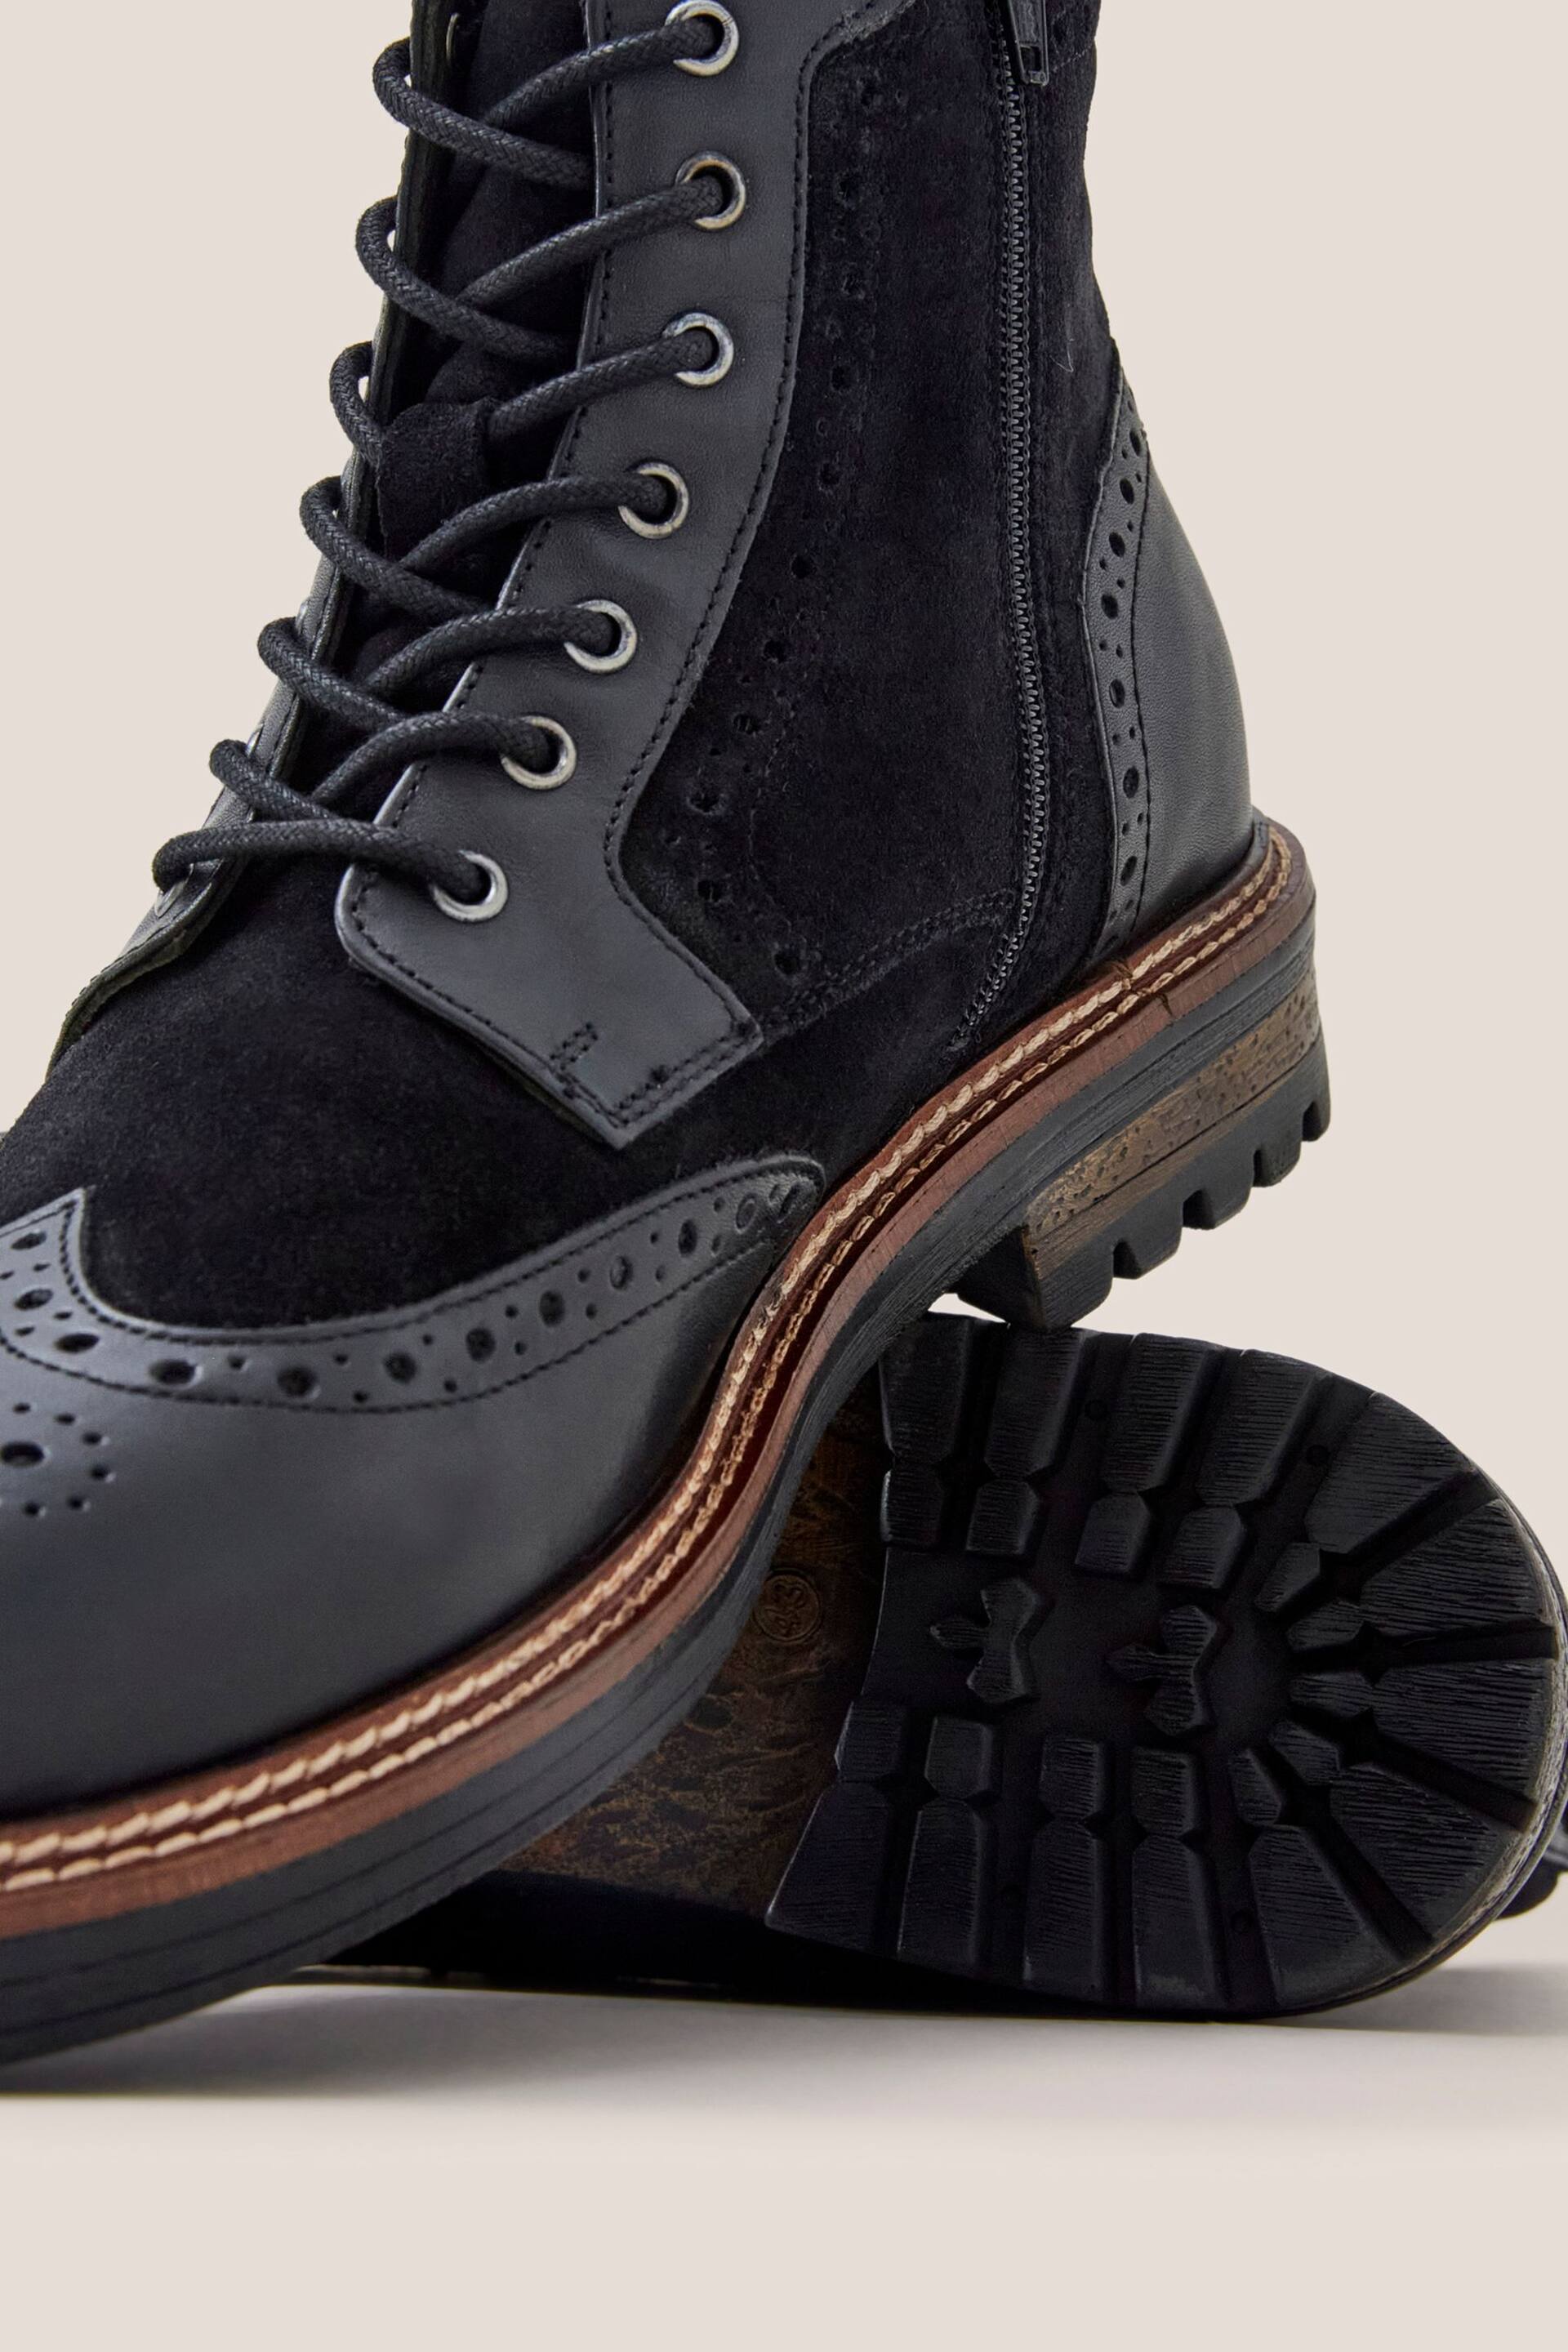 White Stuff Black Brogue Leather Lace-Up Boots - Image 5 of 5